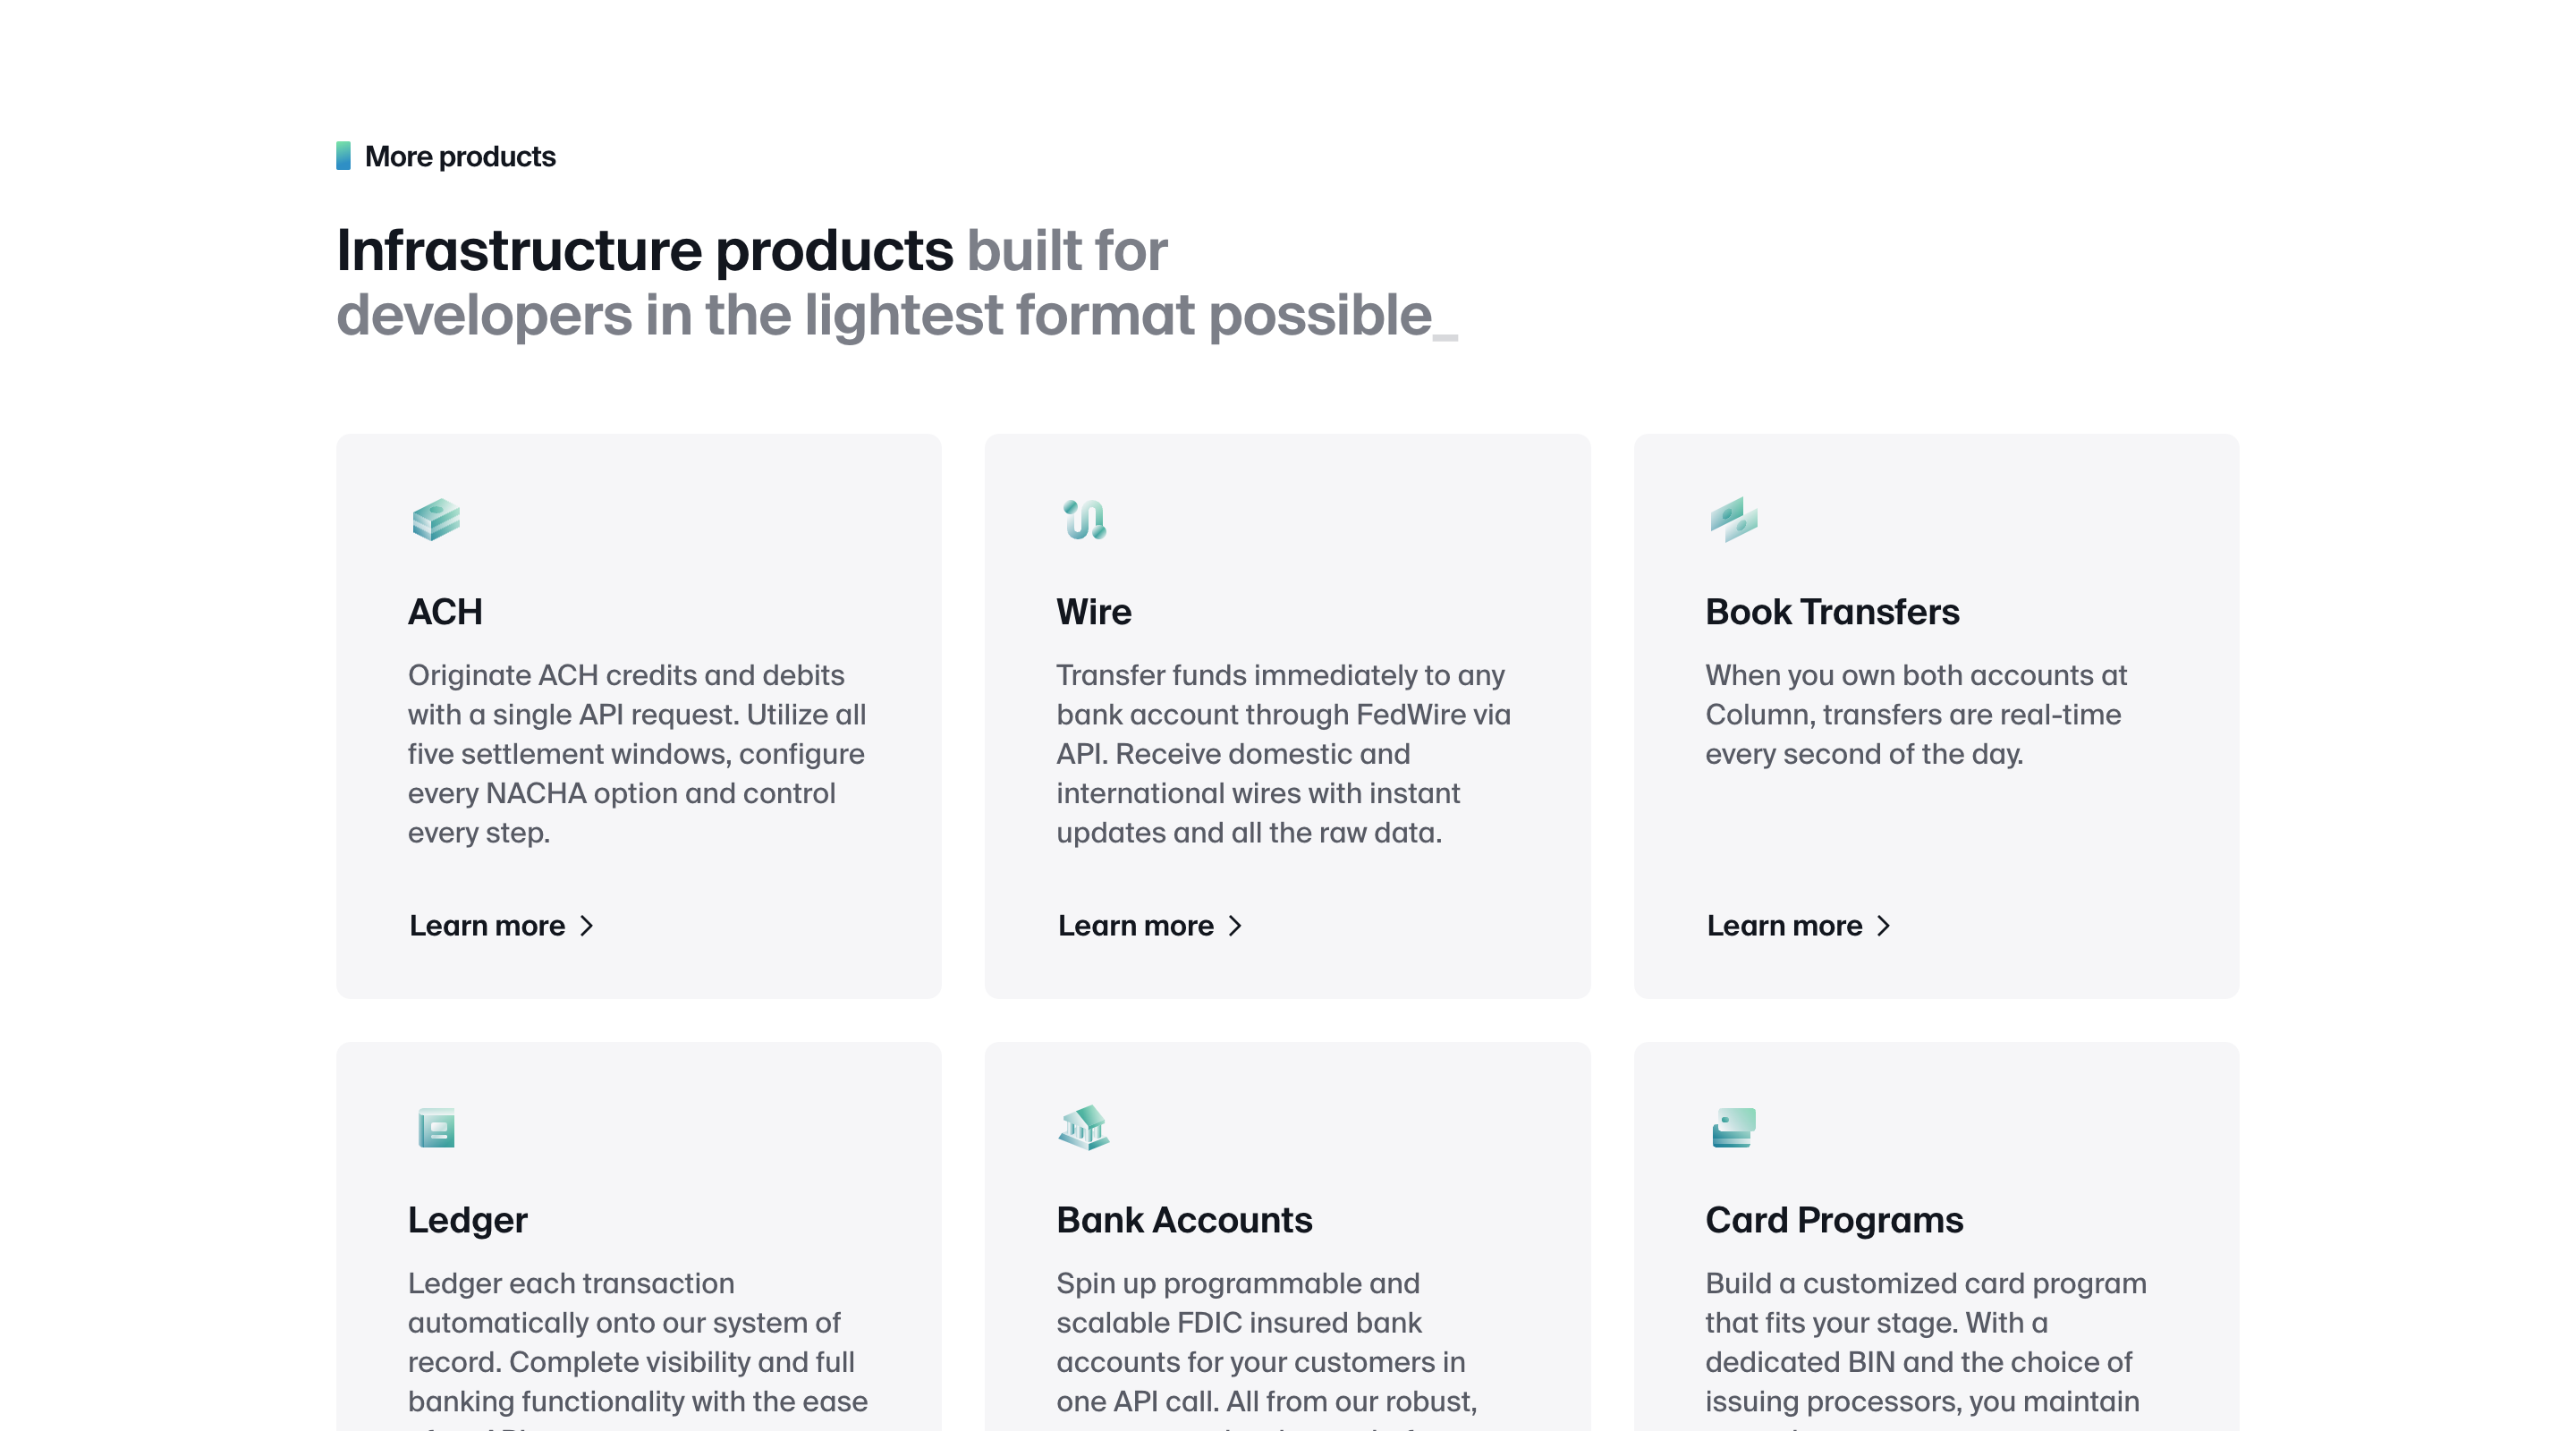 Screenshot of a 'More products' section on the Column website. The section lists products in blocks arranged in three columns. Each block contains the product name, a short description, a stylized icon, and a 'Learn more' button.